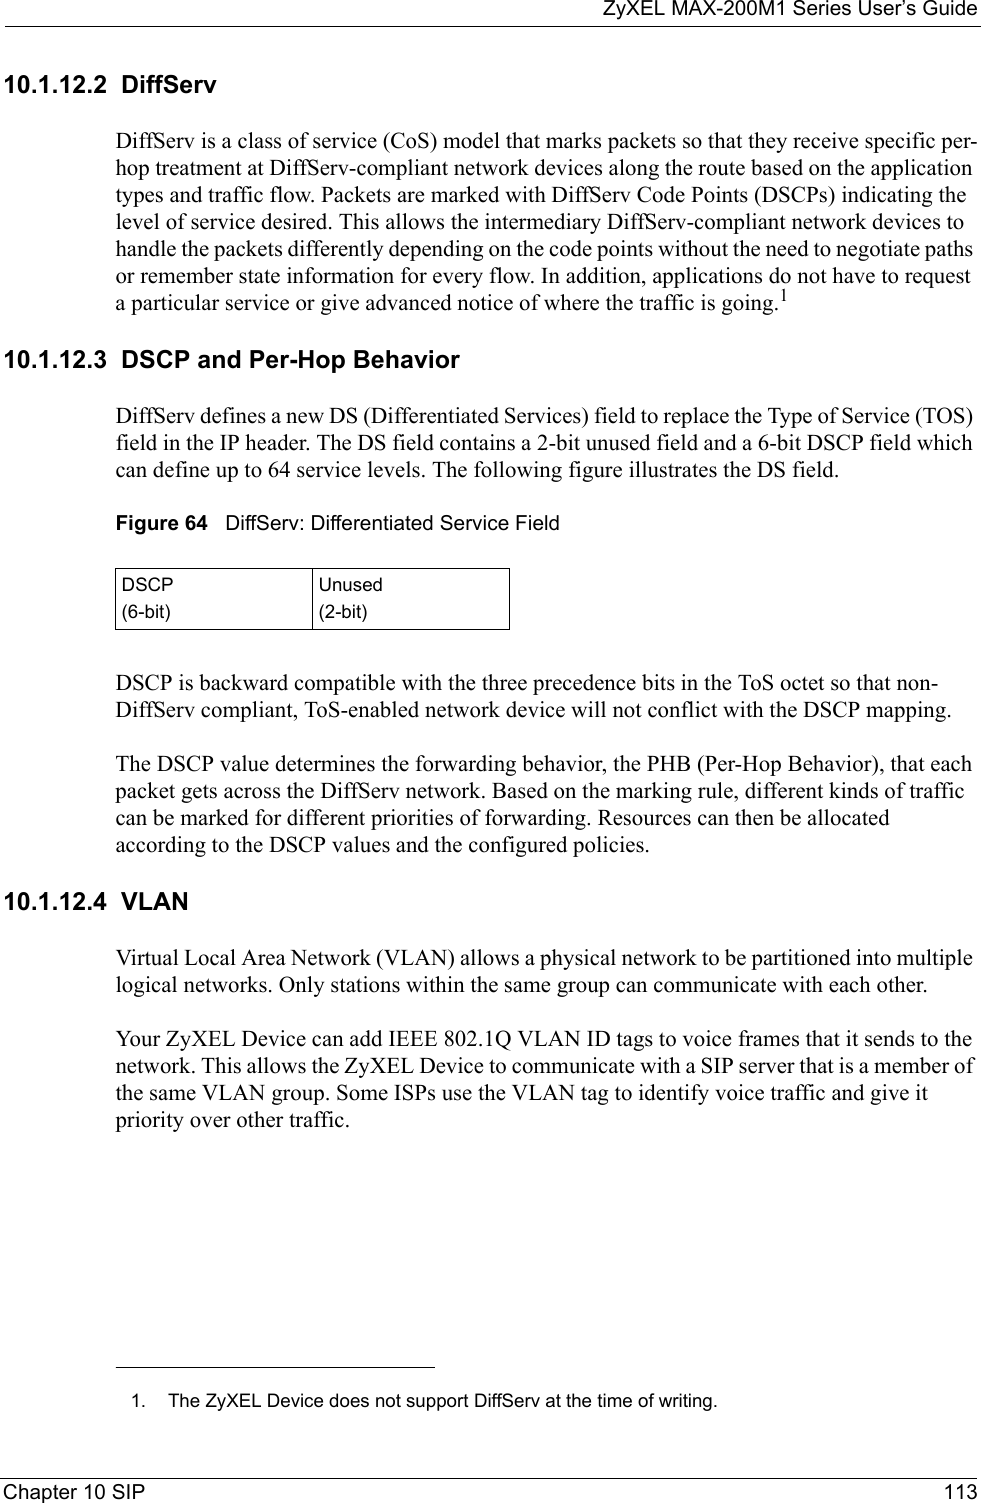 ZyXEL MAX-200M1 Series User’s GuideChapter 10 SIP 11310.1.12.2  DiffServDiffServ is a class of service (CoS) model that marks packets so that they receive specific per-hop treatment at DiffServ-compliant network devices along the route based on the application types and traffic flow. Packets are marked with DiffServ Code Points (DSCPs) indicating the level of service desired. This allows the intermediary DiffServ-compliant network devices to handle the packets differently depending on the code points without the need to negotiate paths or remember state information for every flow. In addition, applications do not have to request a particular service or give advanced notice of where the traffic is going.110.1.12.3  DSCP and Per-Hop Behavior DiffServ defines a new DS (Differentiated Services) field to replace the Type of Service (TOS) field in the IP header. The DS field contains a 2-bit unused field and a 6-bit DSCP field which can define up to 64 service levels. The following figure illustrates the DS field. Figure 64   DiffServ: Differentiated Service FieldDSCP is backward compatible with the three precedence bits in the ToS octet so that non-DiffServ compliant, ToS-enabled network device will not conflict with the DSCP mapping. The DSCP value determines the forwarding behavior, the PHB (Per-Hop Behavior), that each packet gets across the DiffServ network. Based on the marking rule, different kinds of traffic can be marked for different priorities of forwarding. Resources can then be allocated according to the DSCP values and the configured policies.10.1.12.4  VLANVirtual Local Area Network (VLAN) allows a physical network to be partitioned into multiple logical networks. Only stations within the same group can communicate with each other. Your ZyXEL Device can add IEEE 802.1Q VLAN ID tags to voice frames that it sends to the network. This allows the ZyXEL Device to communicate with a SIP server that is a member of the same VLAN group. Some ISPs use the VLAN tag to identify voice traffic and give it priority over other traffic.1. The ZyXEL Device does not support DiffServ at the time of writing.DSCP(6-bit)Unused(2-bit)